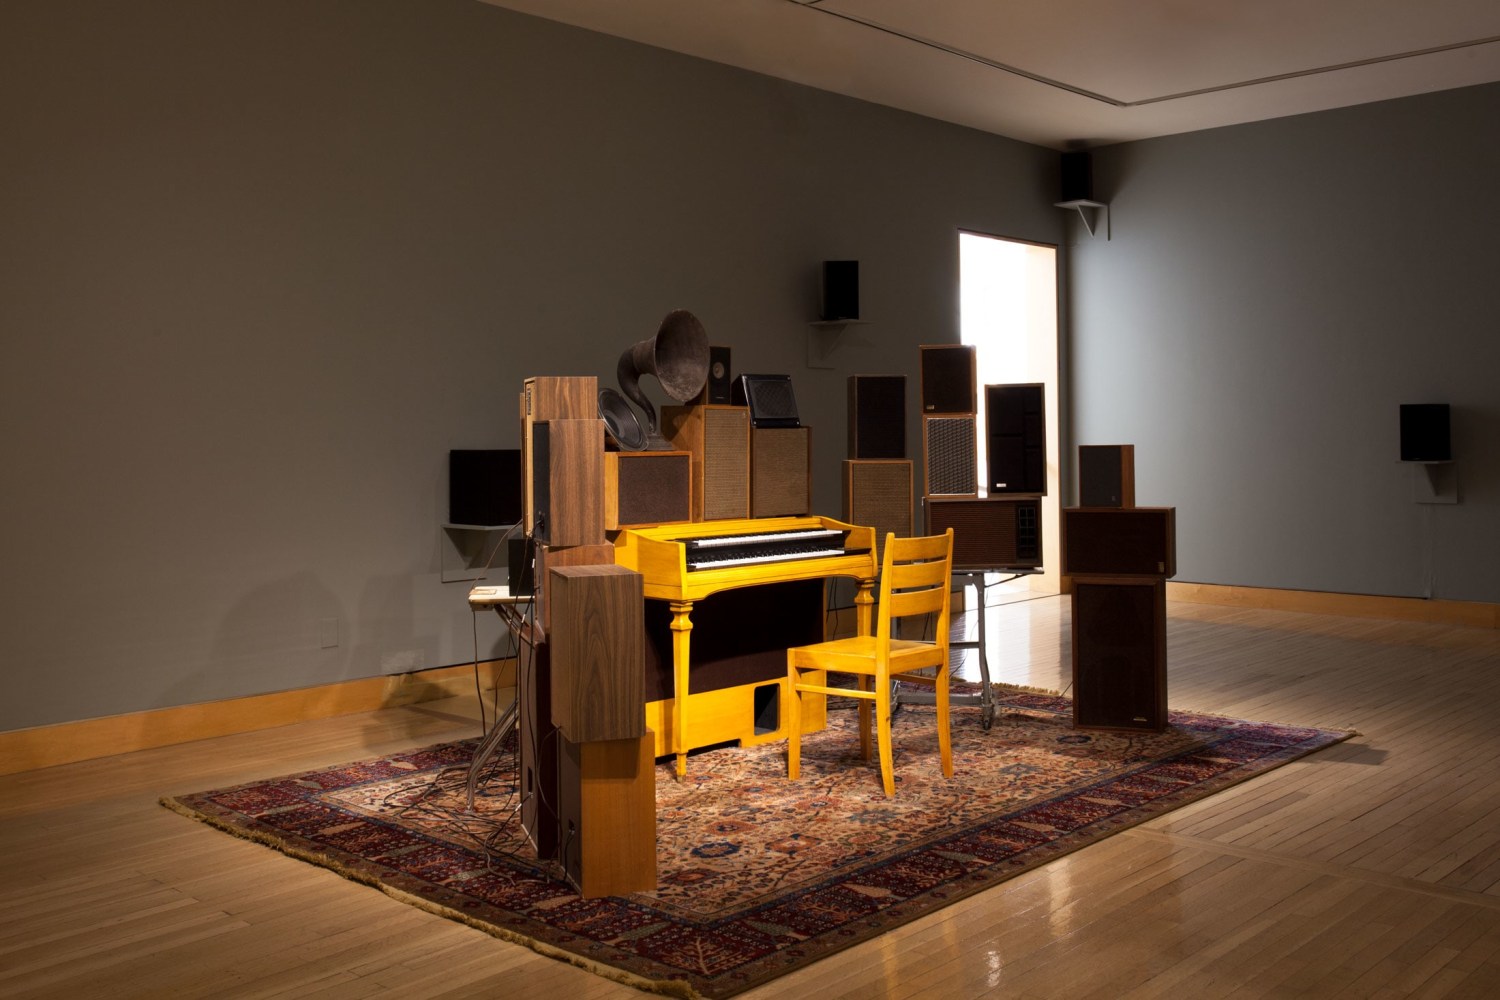 Janet Cardiff and George Bures Miller
The Poetry Machine,&amp;nbsp;2017
Interactive audio/mixed-media installation including organ, speakers, carpet, computer and electronics
Dimensions variable
Installation view, THE POETRY MACHINE &amp;amp; Other Works
May 3 &amp;ndash;&amp;nbsp;July 5, 2018
Fraenkel Gallery, San Francisco